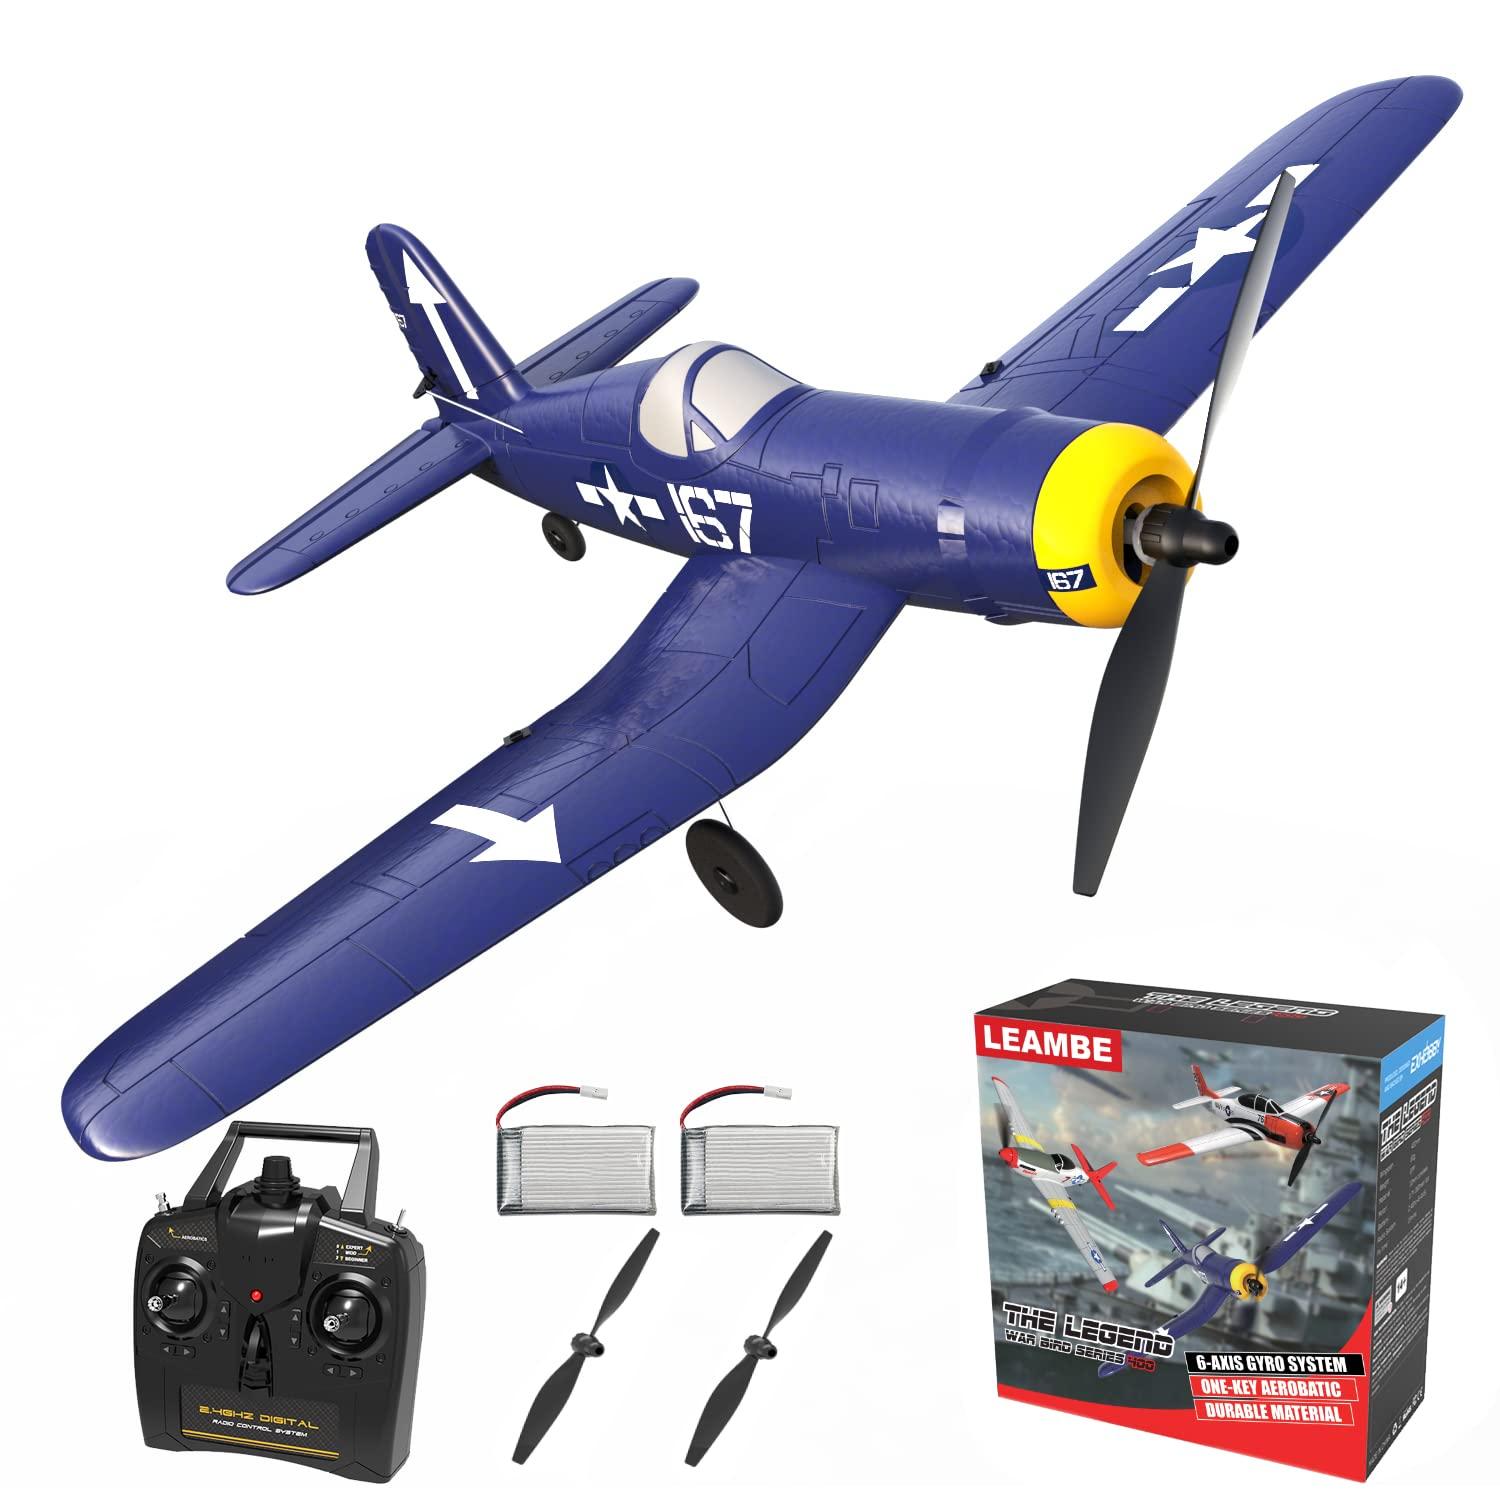 Aeroplane Remote Control Aeroplane Remote Control Aeroplane: Where To Find the Best Aeroplane Remote Control Models and Accessories